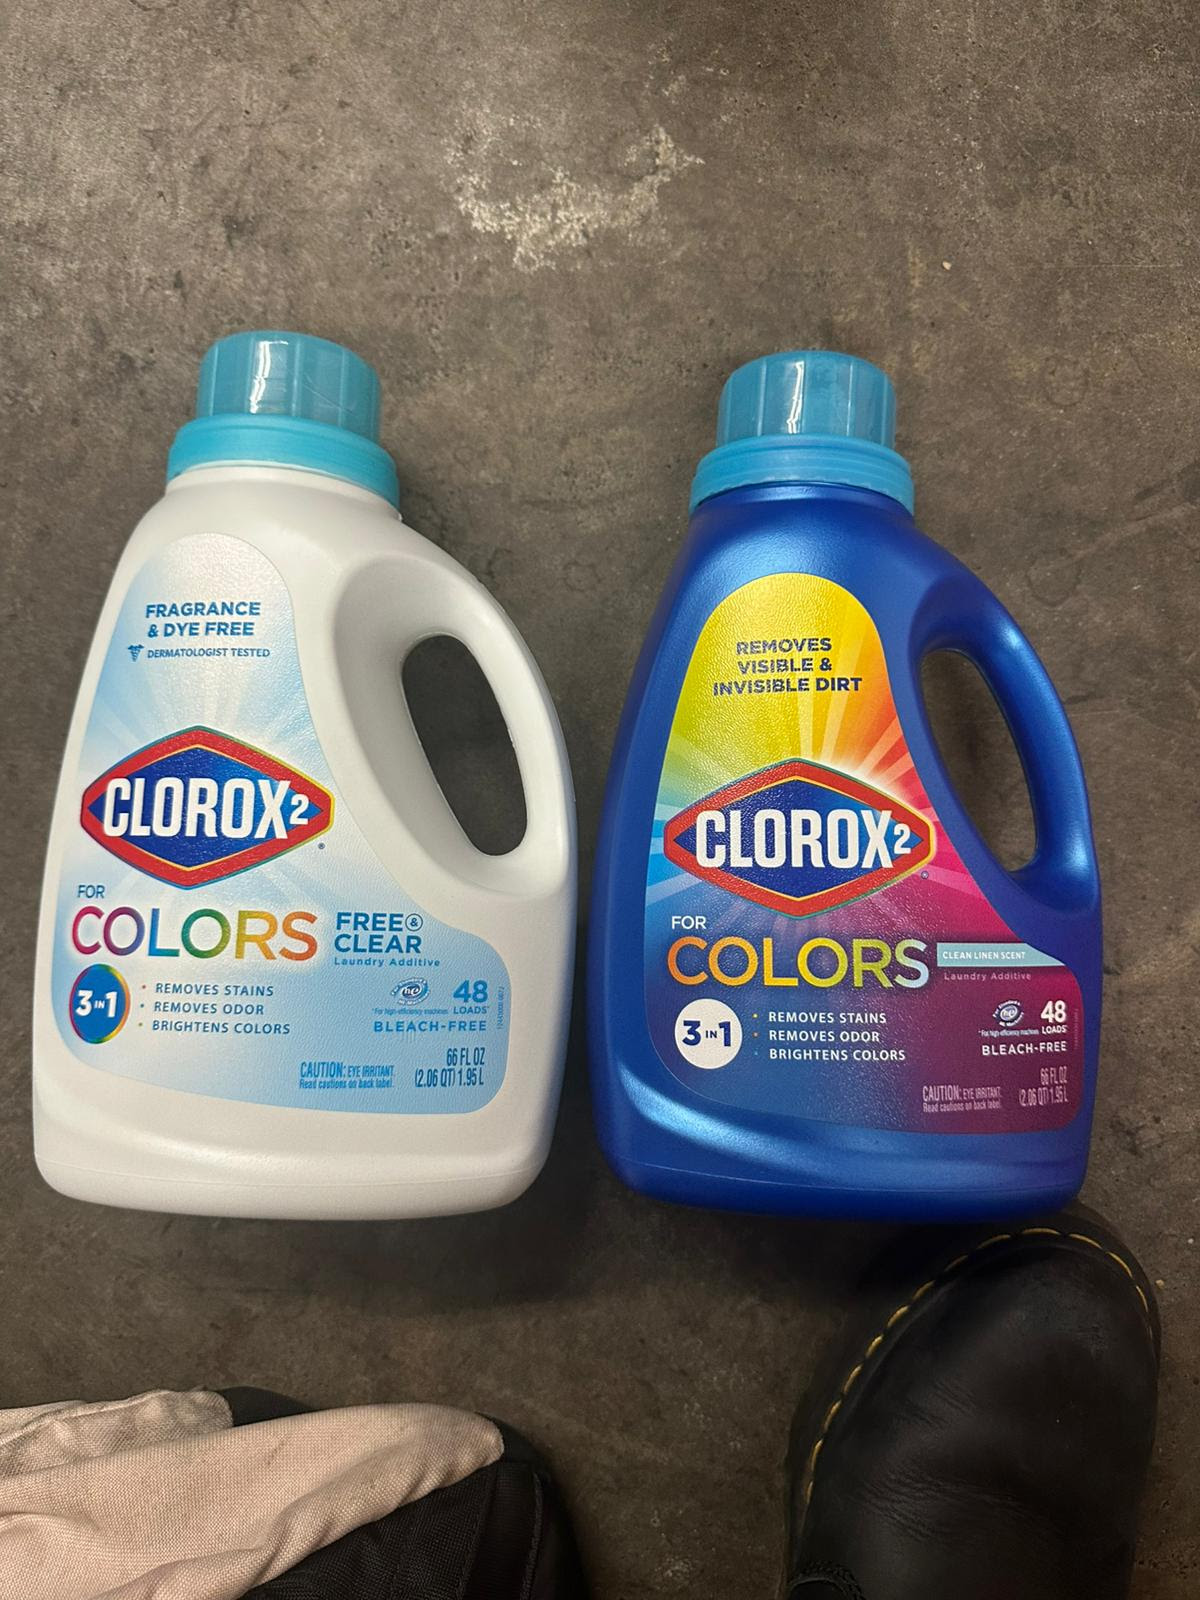 Clorox 2 66oz Laundry Stain Remover and Color Booster.  700 Bottles. EXW Los Angeles $9.00/bottle.